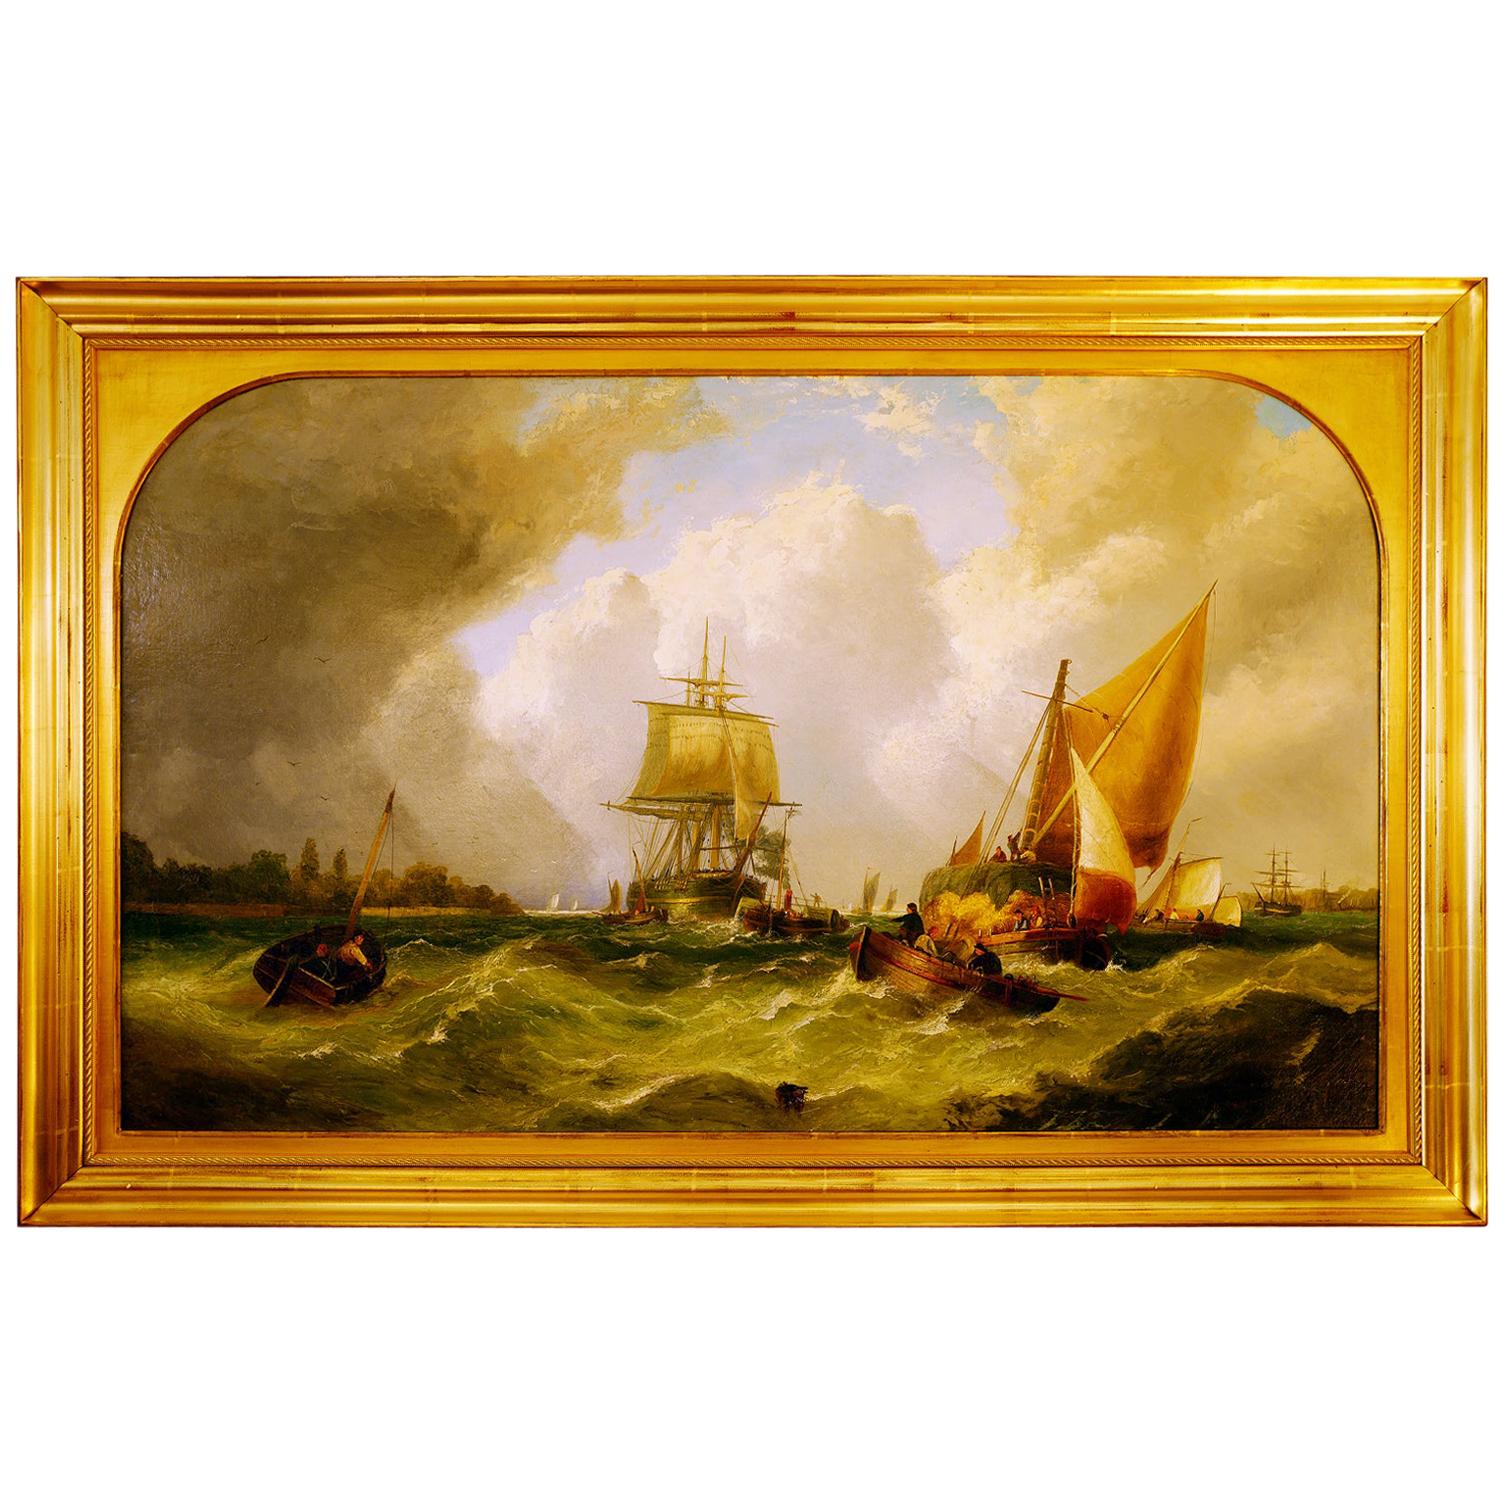 English John Callow Original Oil Painting on Canvas "Shipping in the Medway"